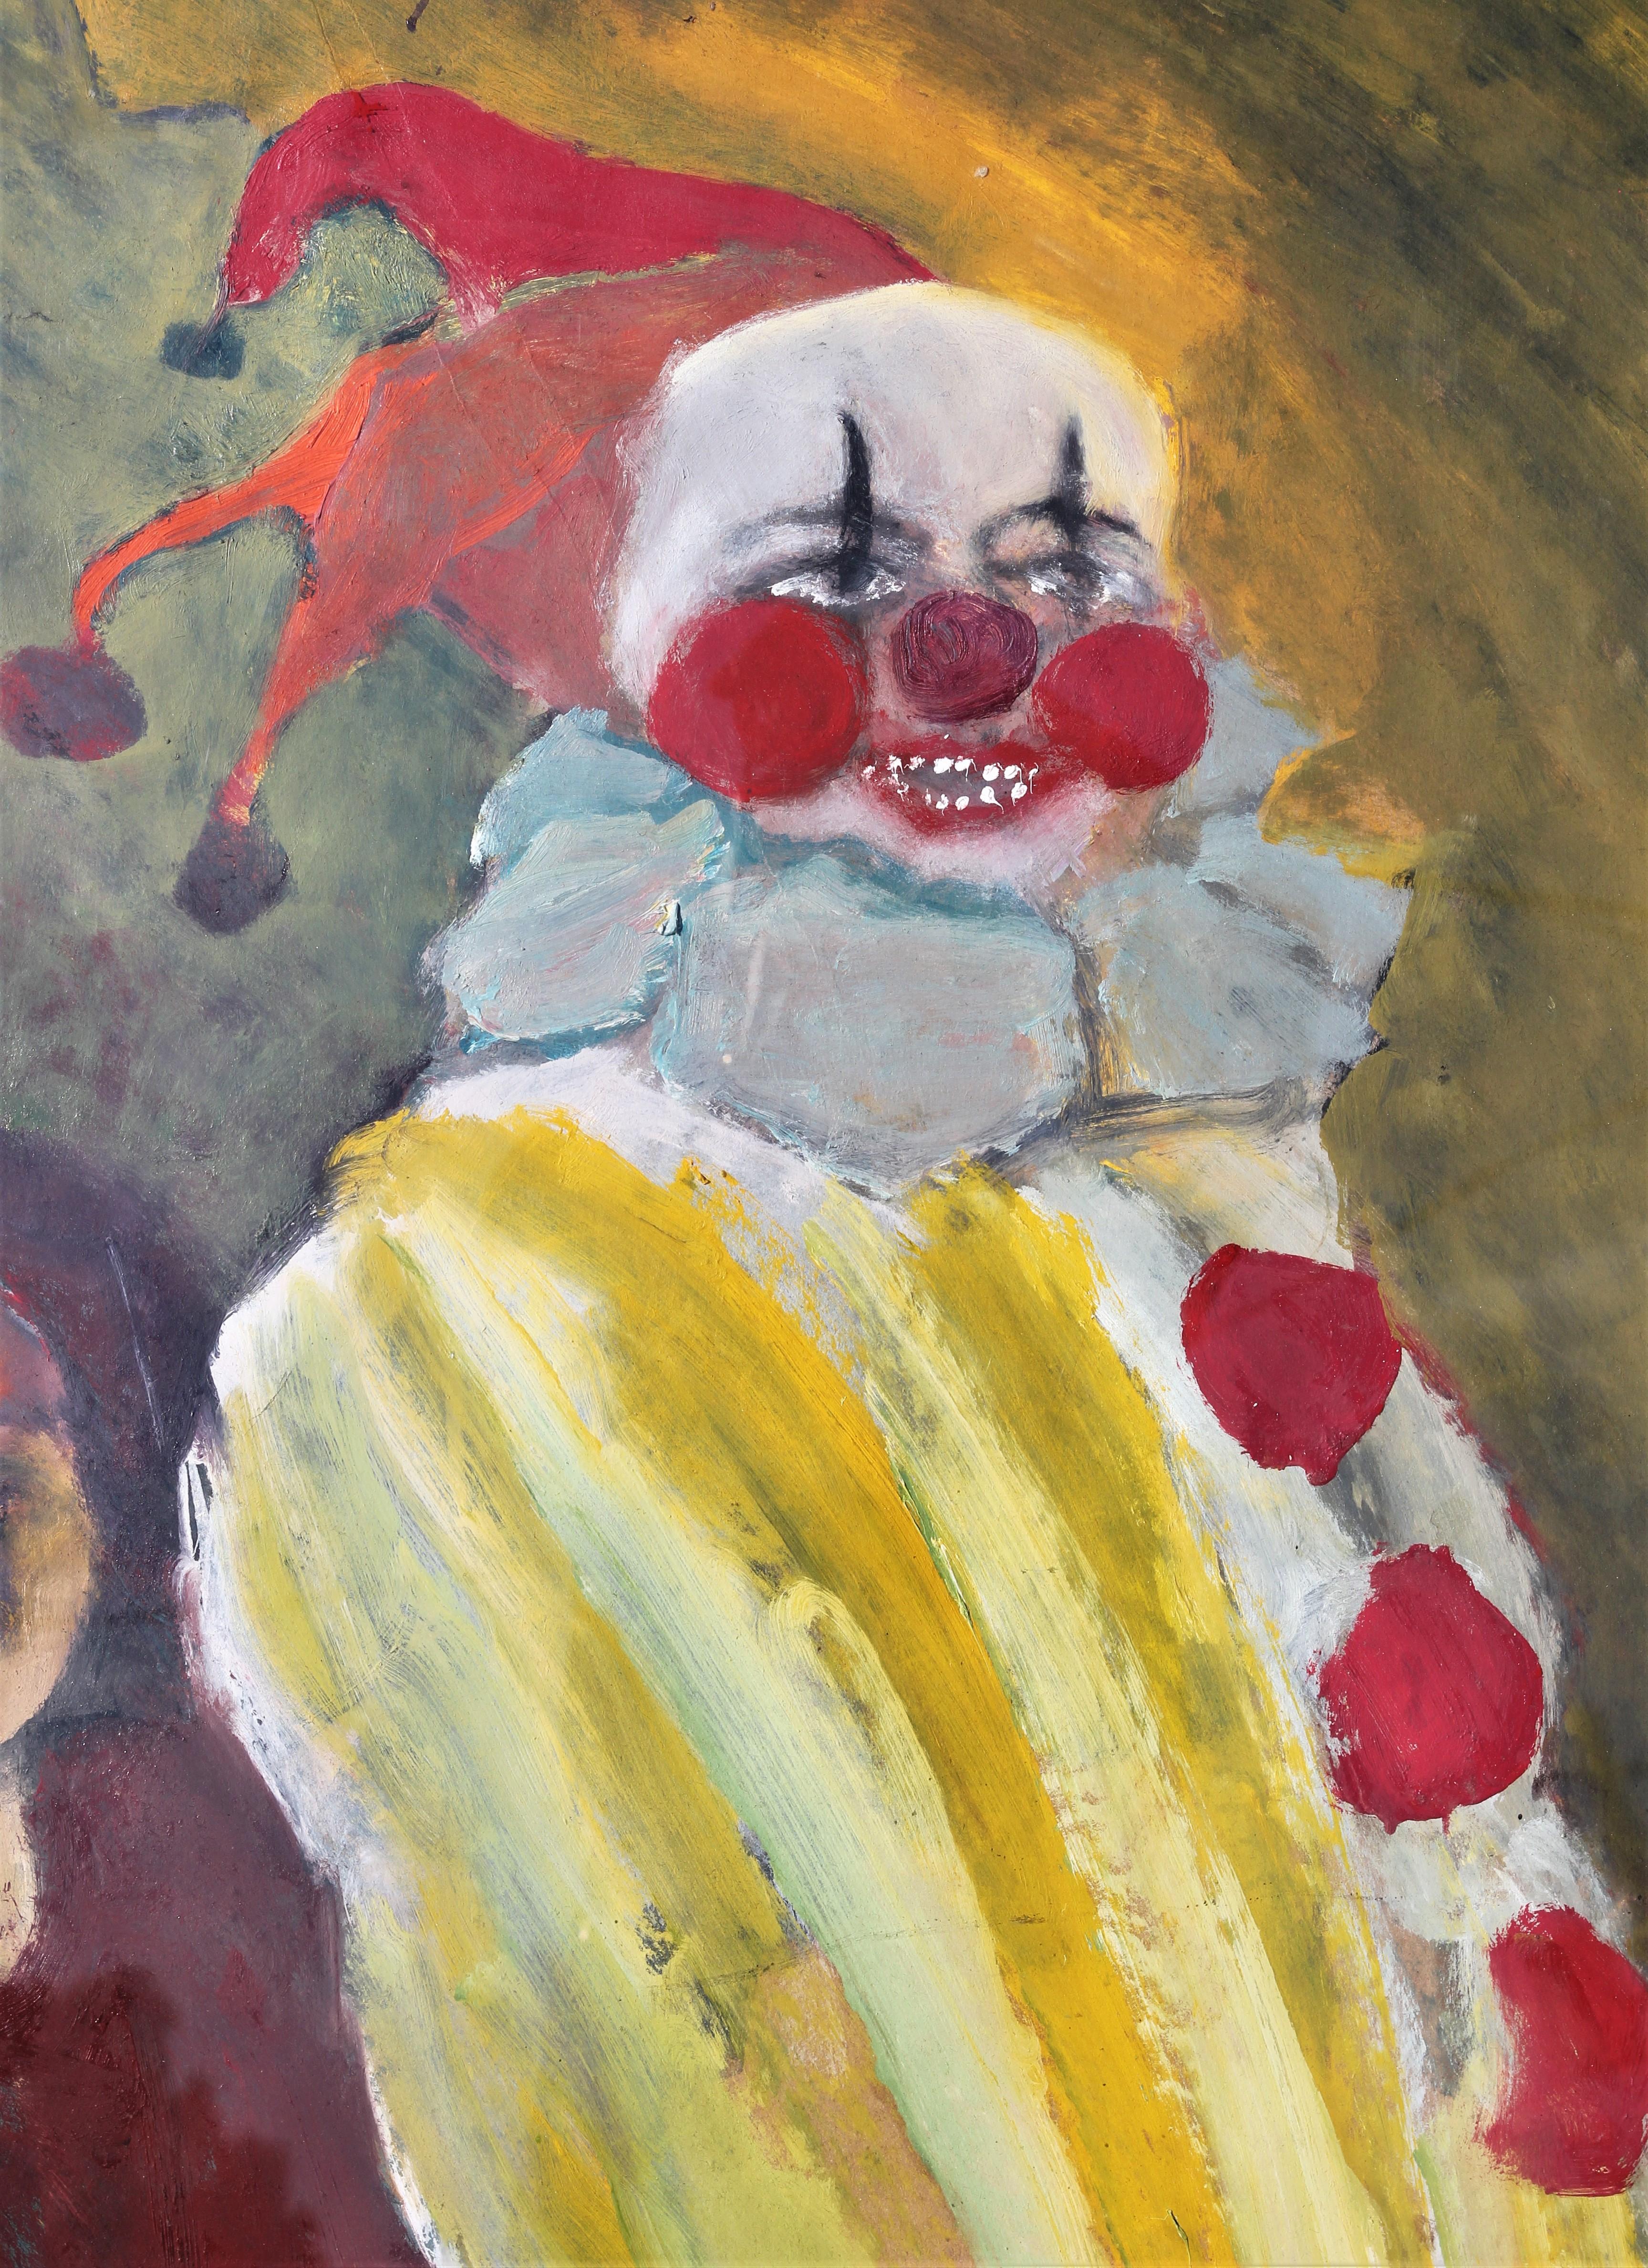 Colorful Surreal Abstract Expressionist Painting of a Macabre Group of Clowns For Sale 1